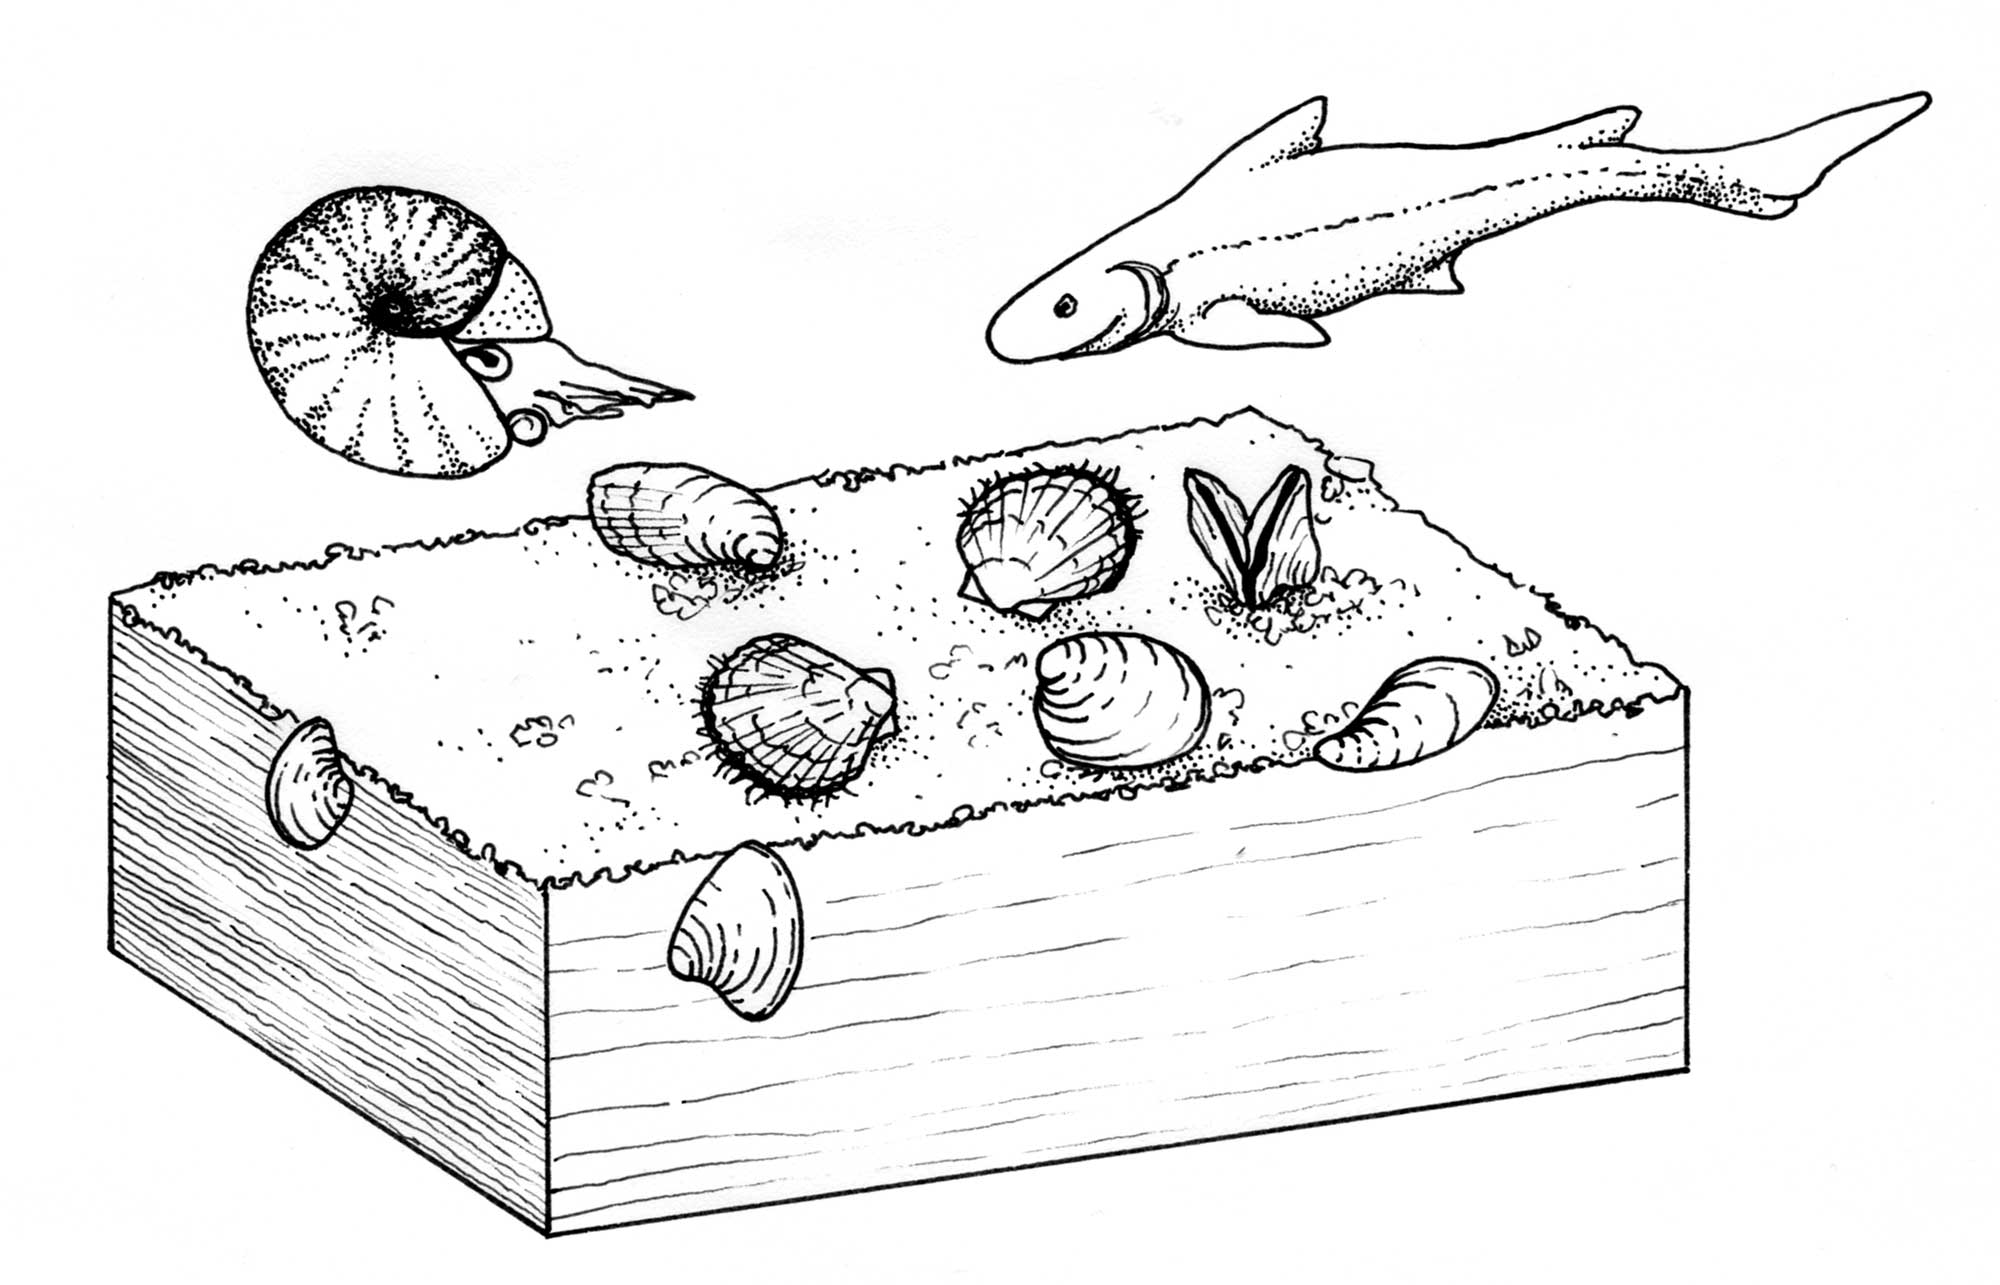 Illustration of the life habits of Triassic bivalves.